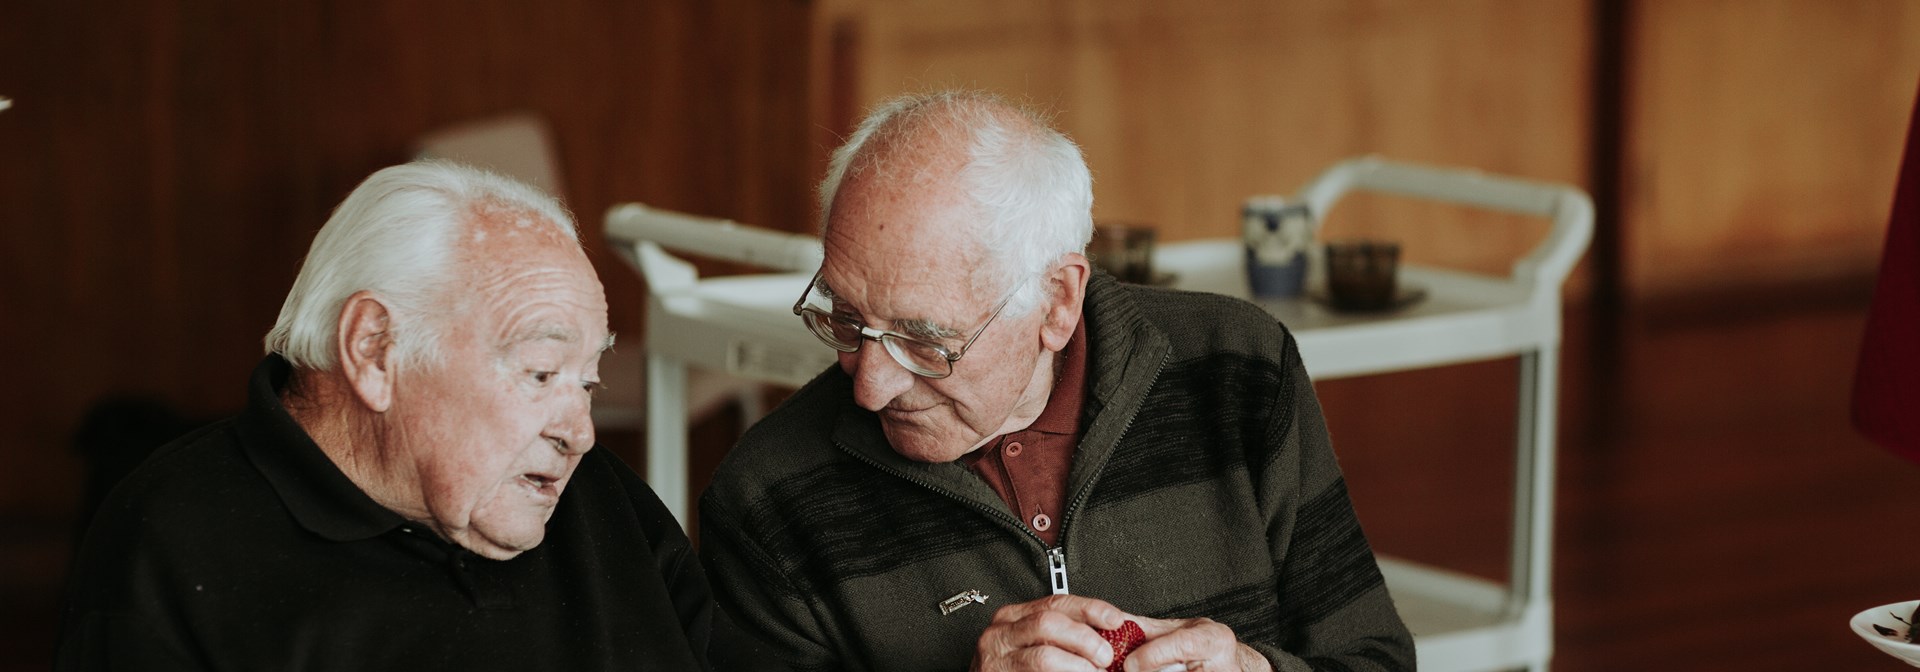 The Selwyn Foundations charitable outreach provides housing for older Aucklanders